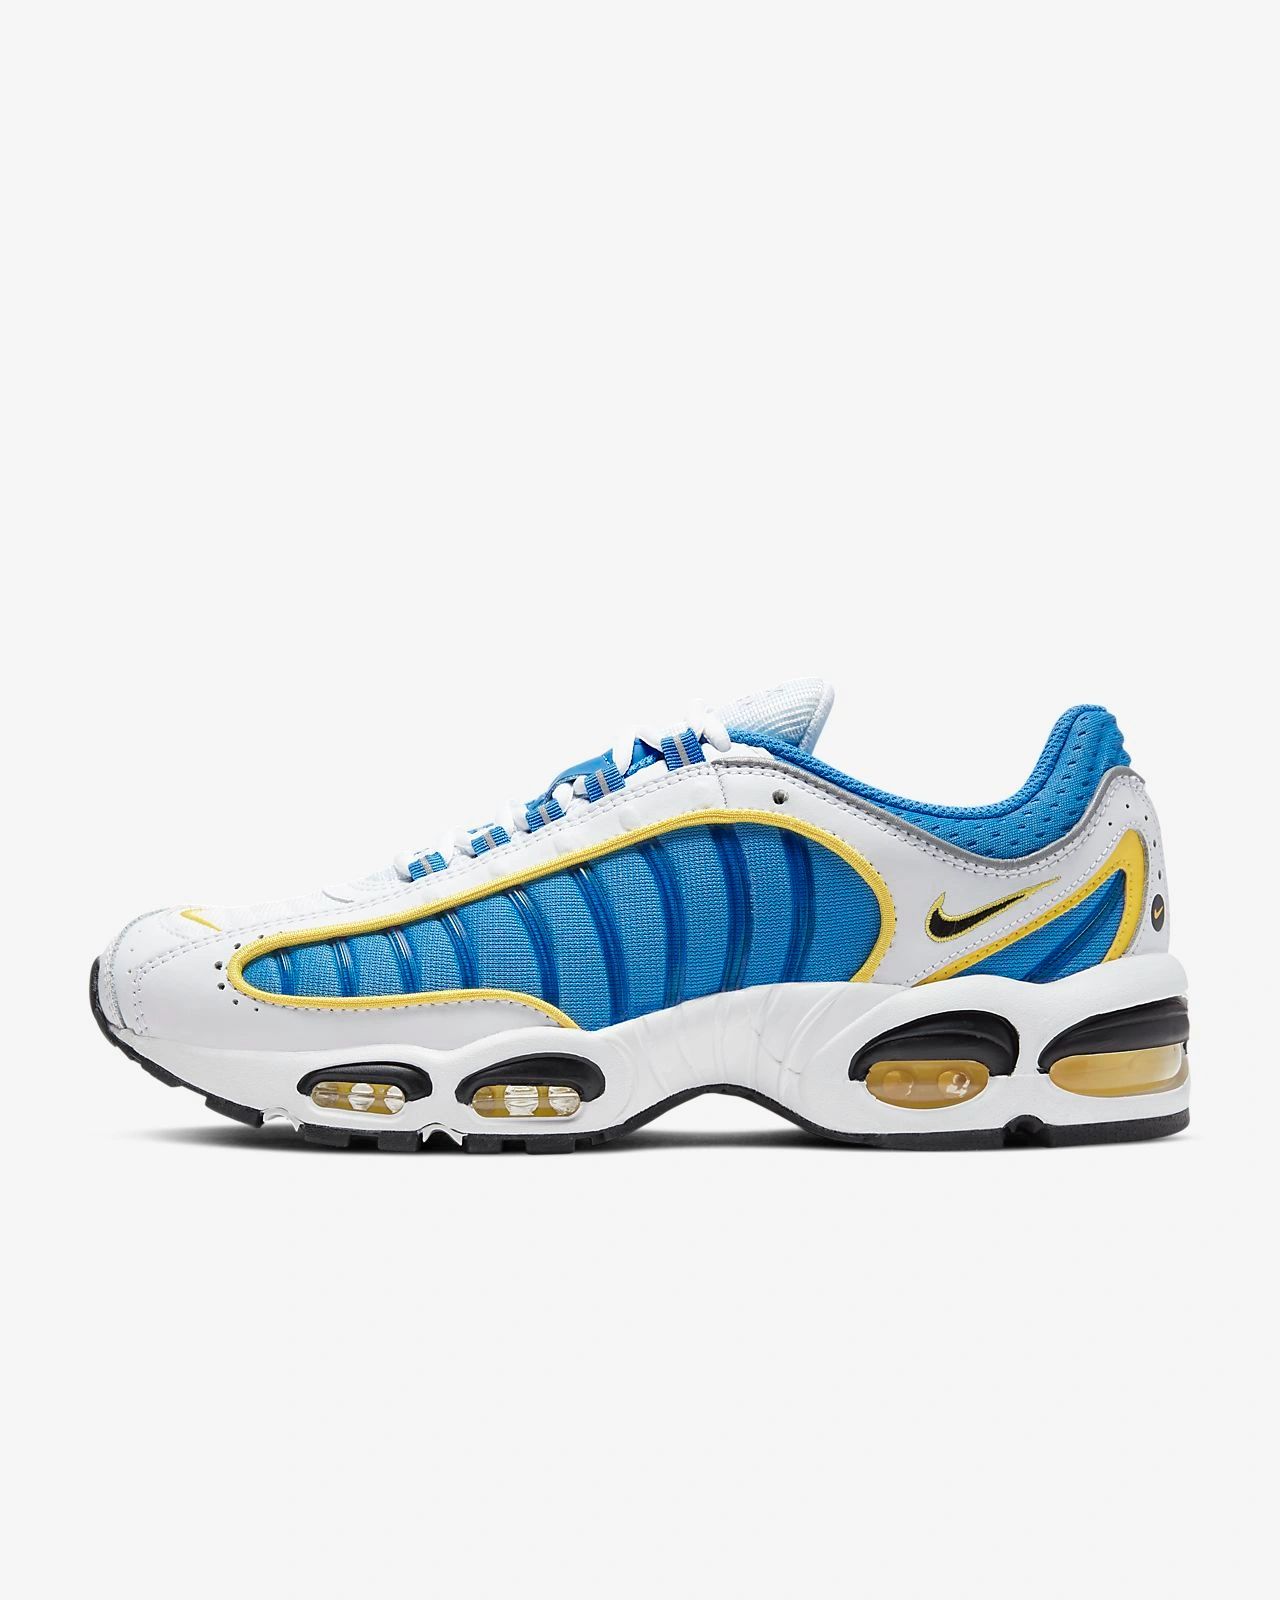 NEW: Nike Air Max Tailwind IV ‘White/Speed Yellow’